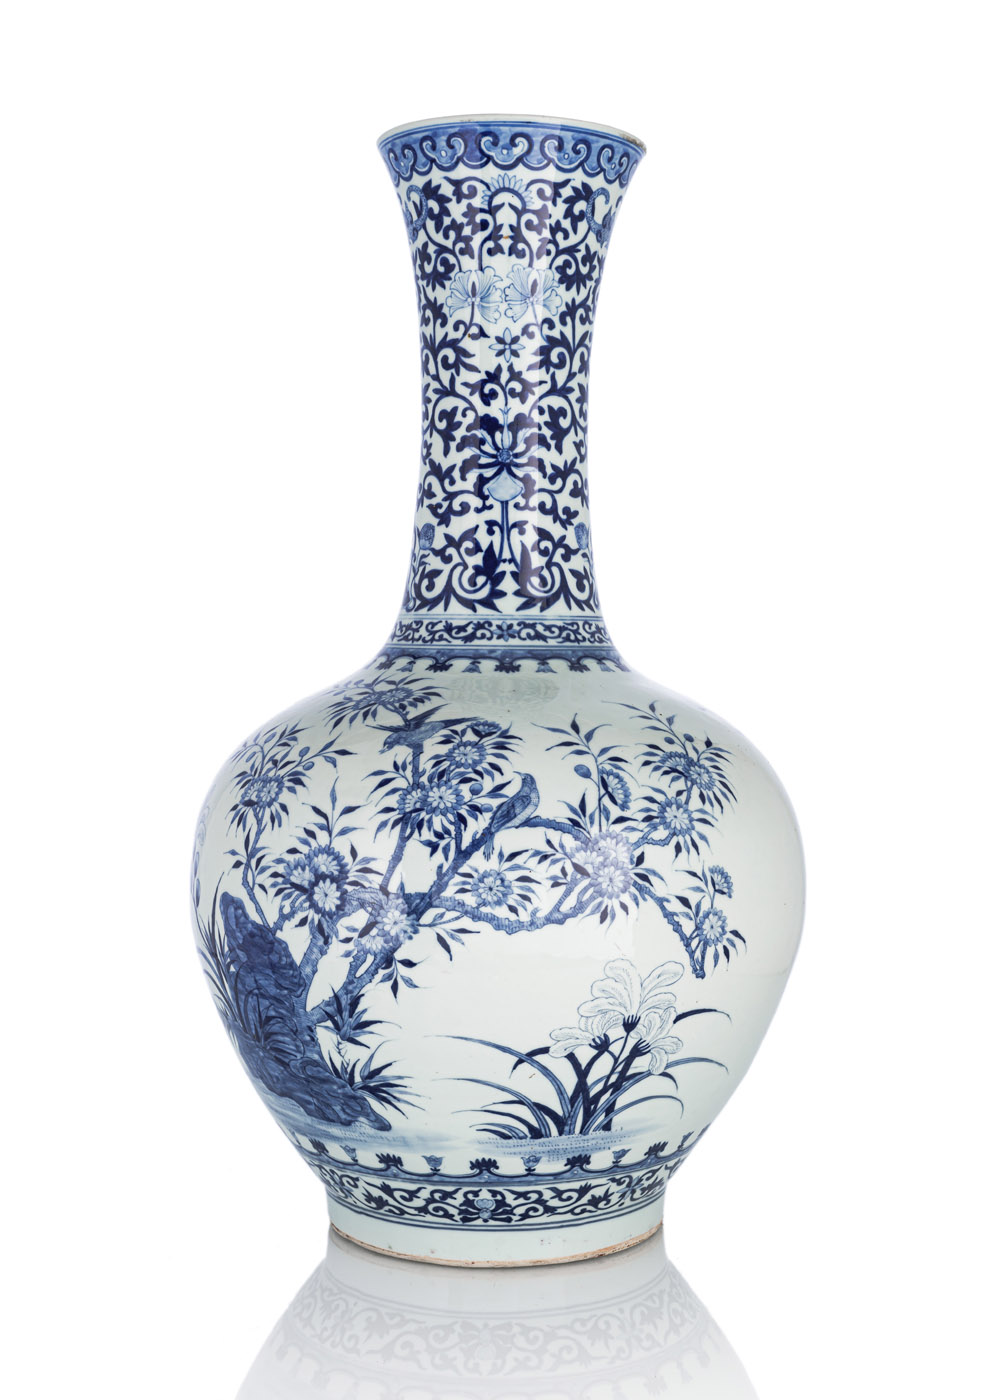 <b>A LARGE BLUE AND WHITE PORCELAIN VASE WITH PRUNUS BRANCHES AND BIRDS</b>